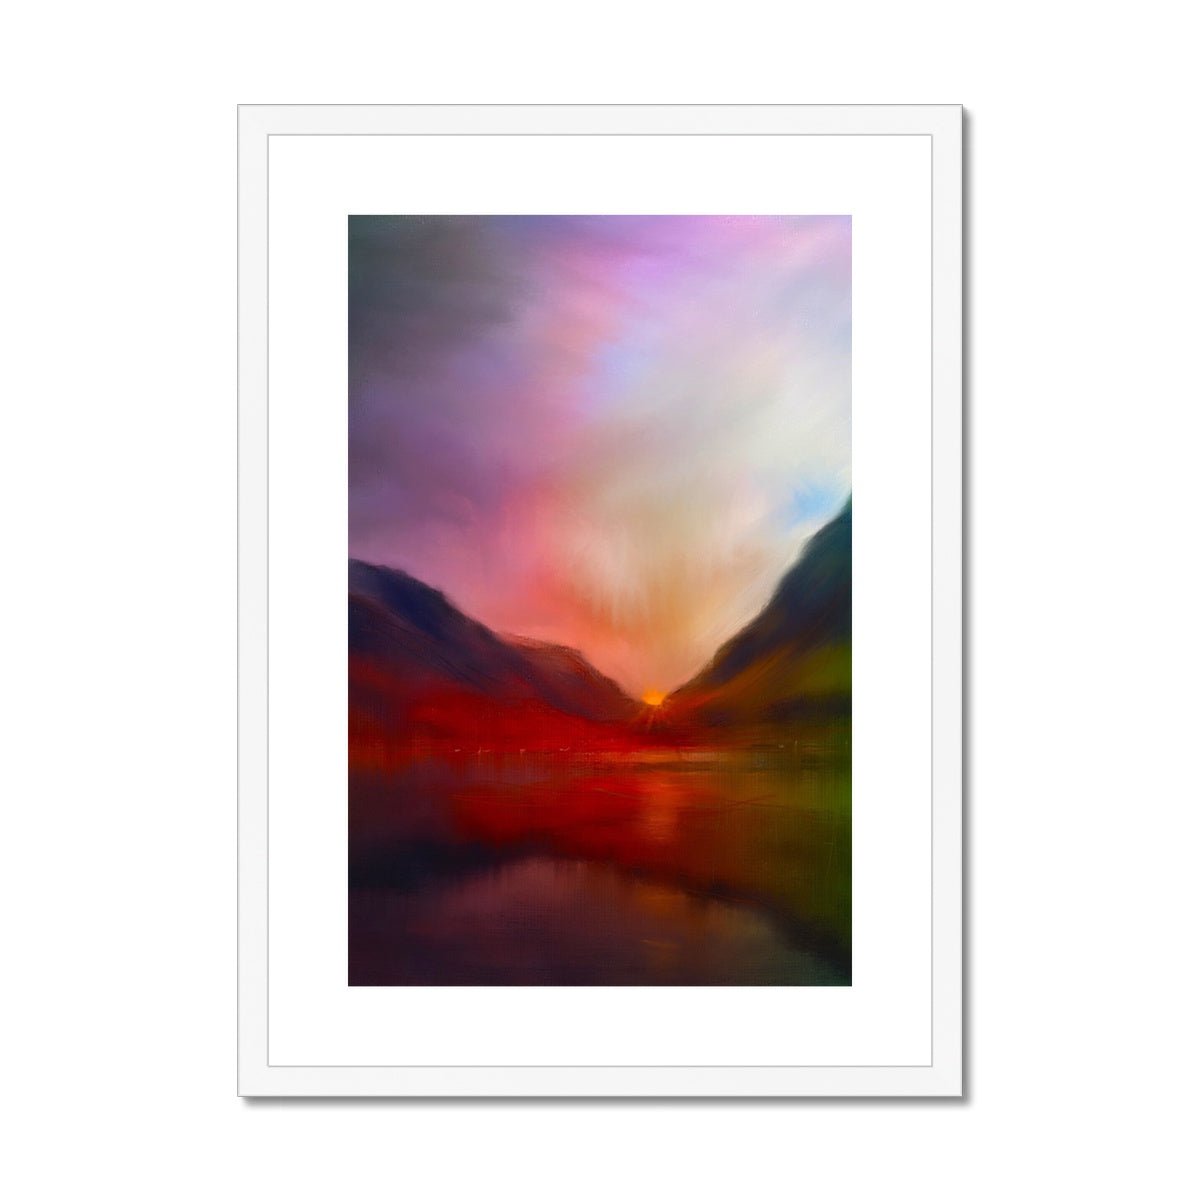 Glencoe Sunset Painting | Framed & Mounted Prints From Scotland-Framed & Mounted Prints-Glencoe Art Gallery-A2 Portrait-White Frame-Paintings, Prints, Homeware, Art Gifts From Scotland By Scottish Artist Kevin Hunter